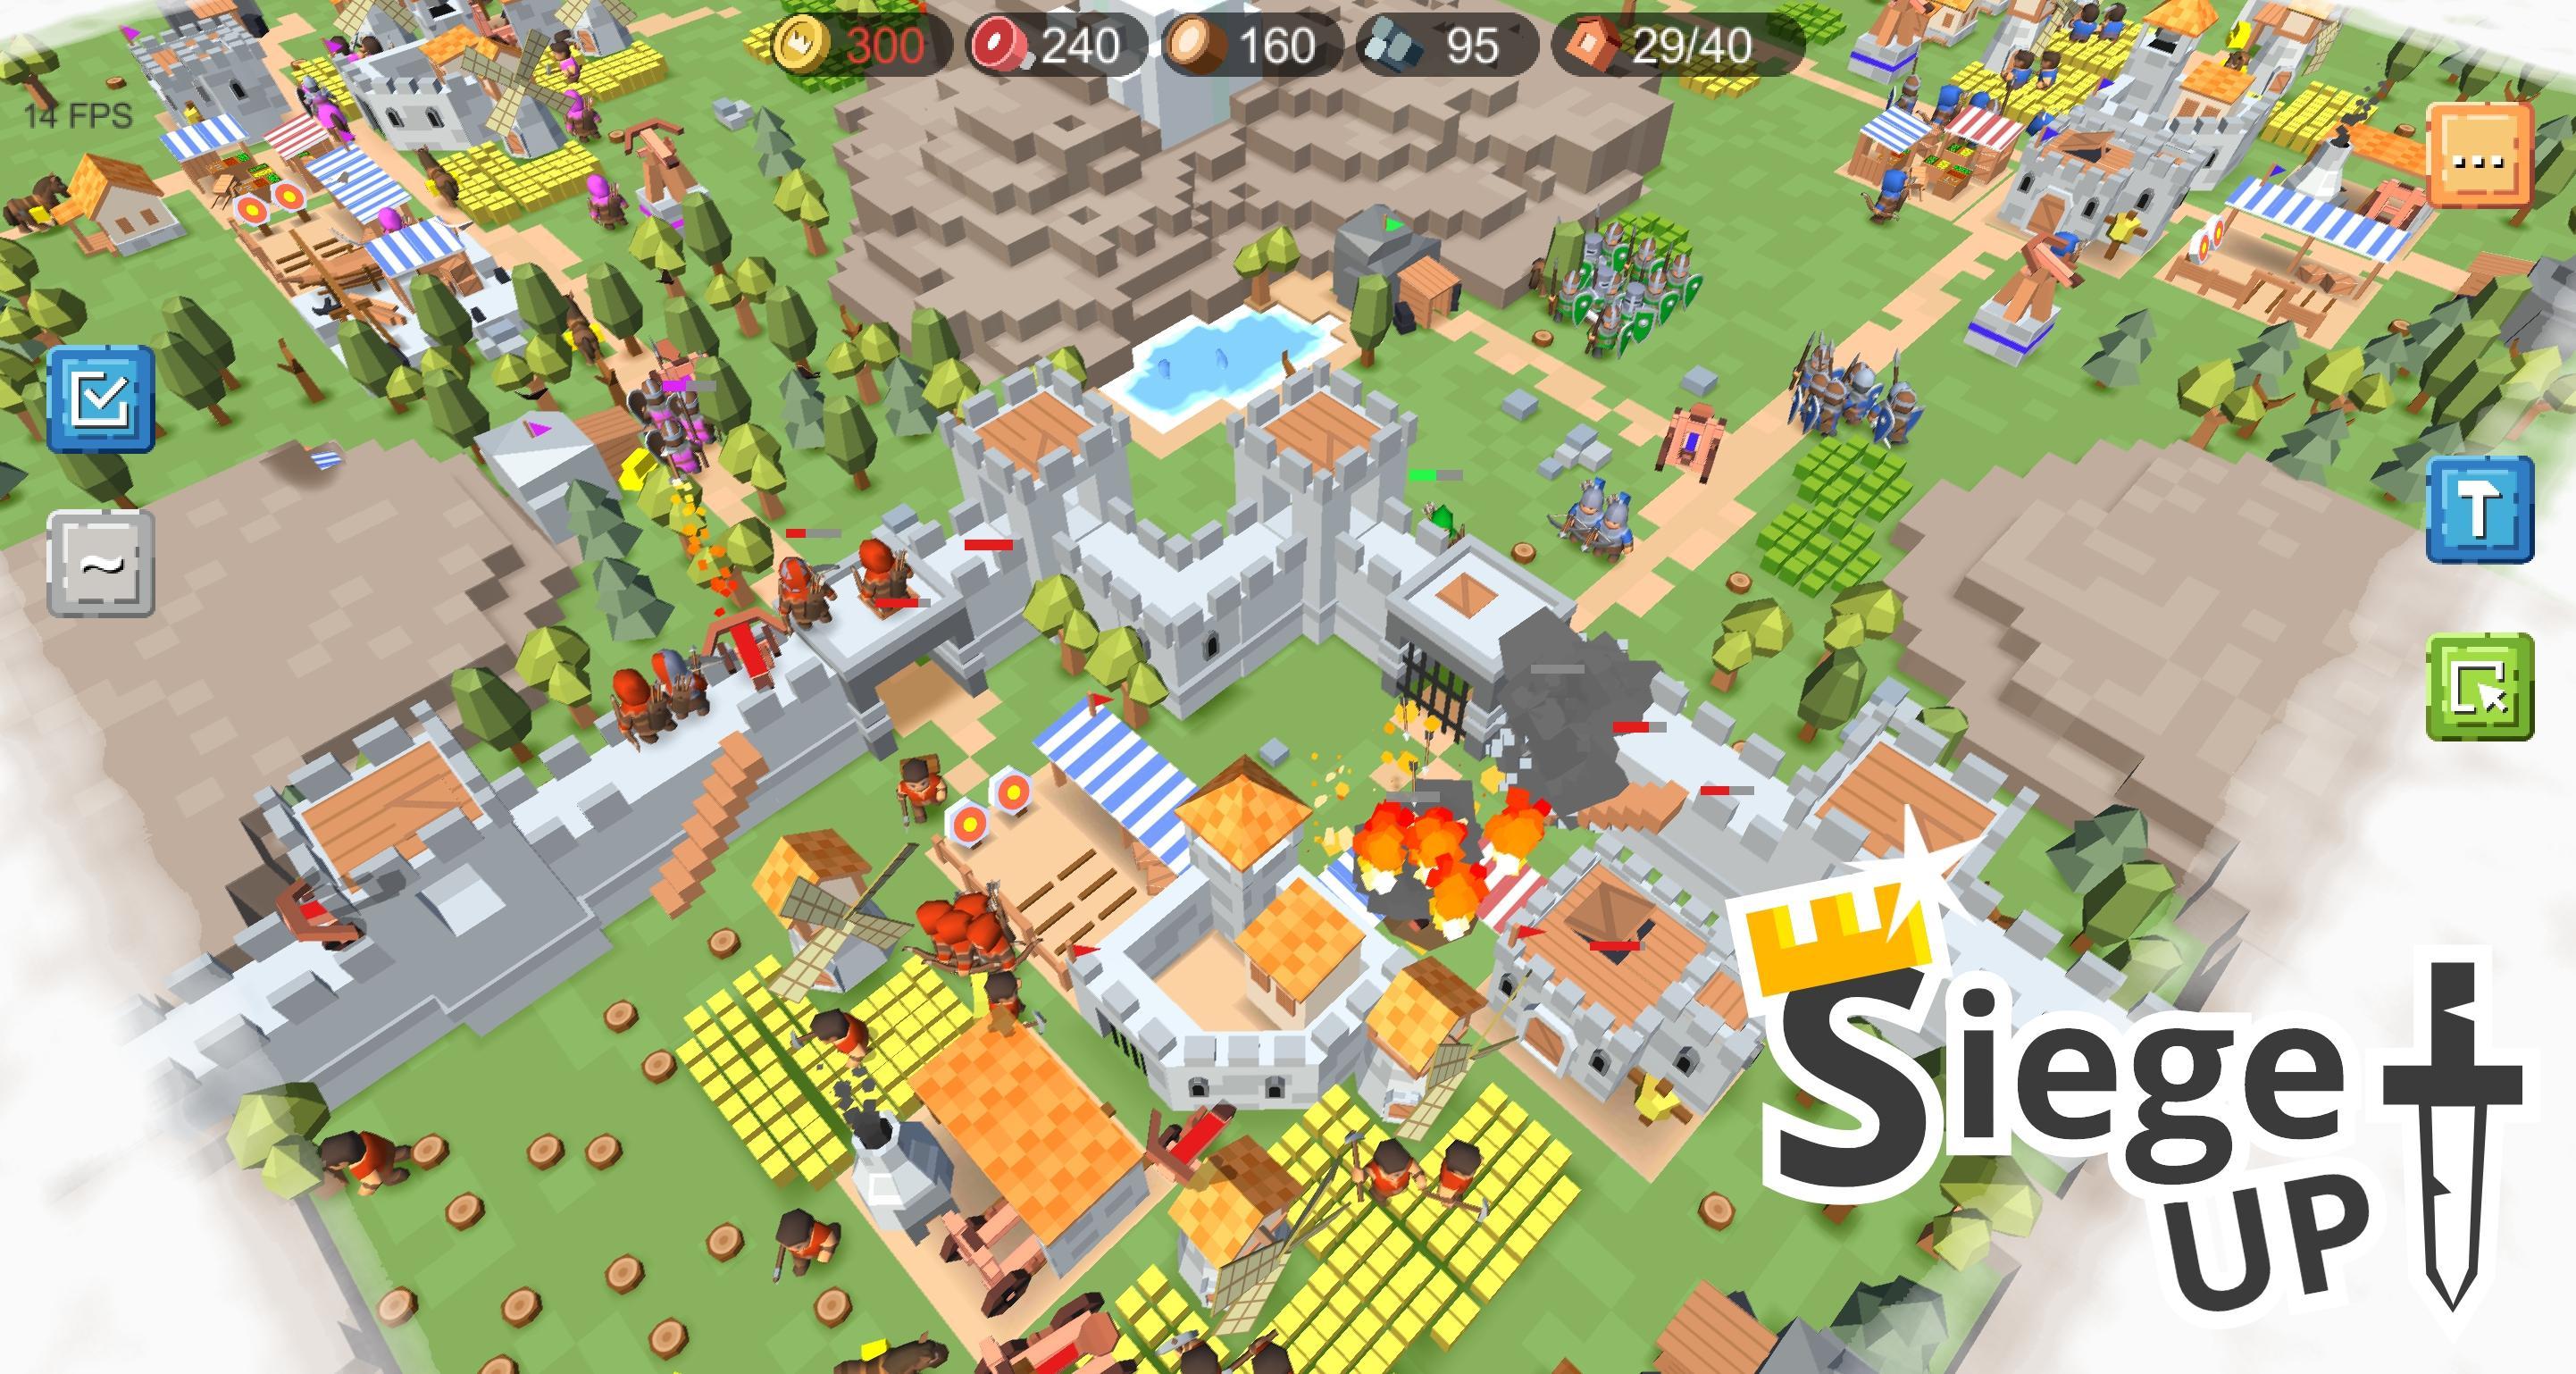 Rts Siege Up Medieval Warfare Strategy Offline For Android Apk Download - roblox medieval warfare